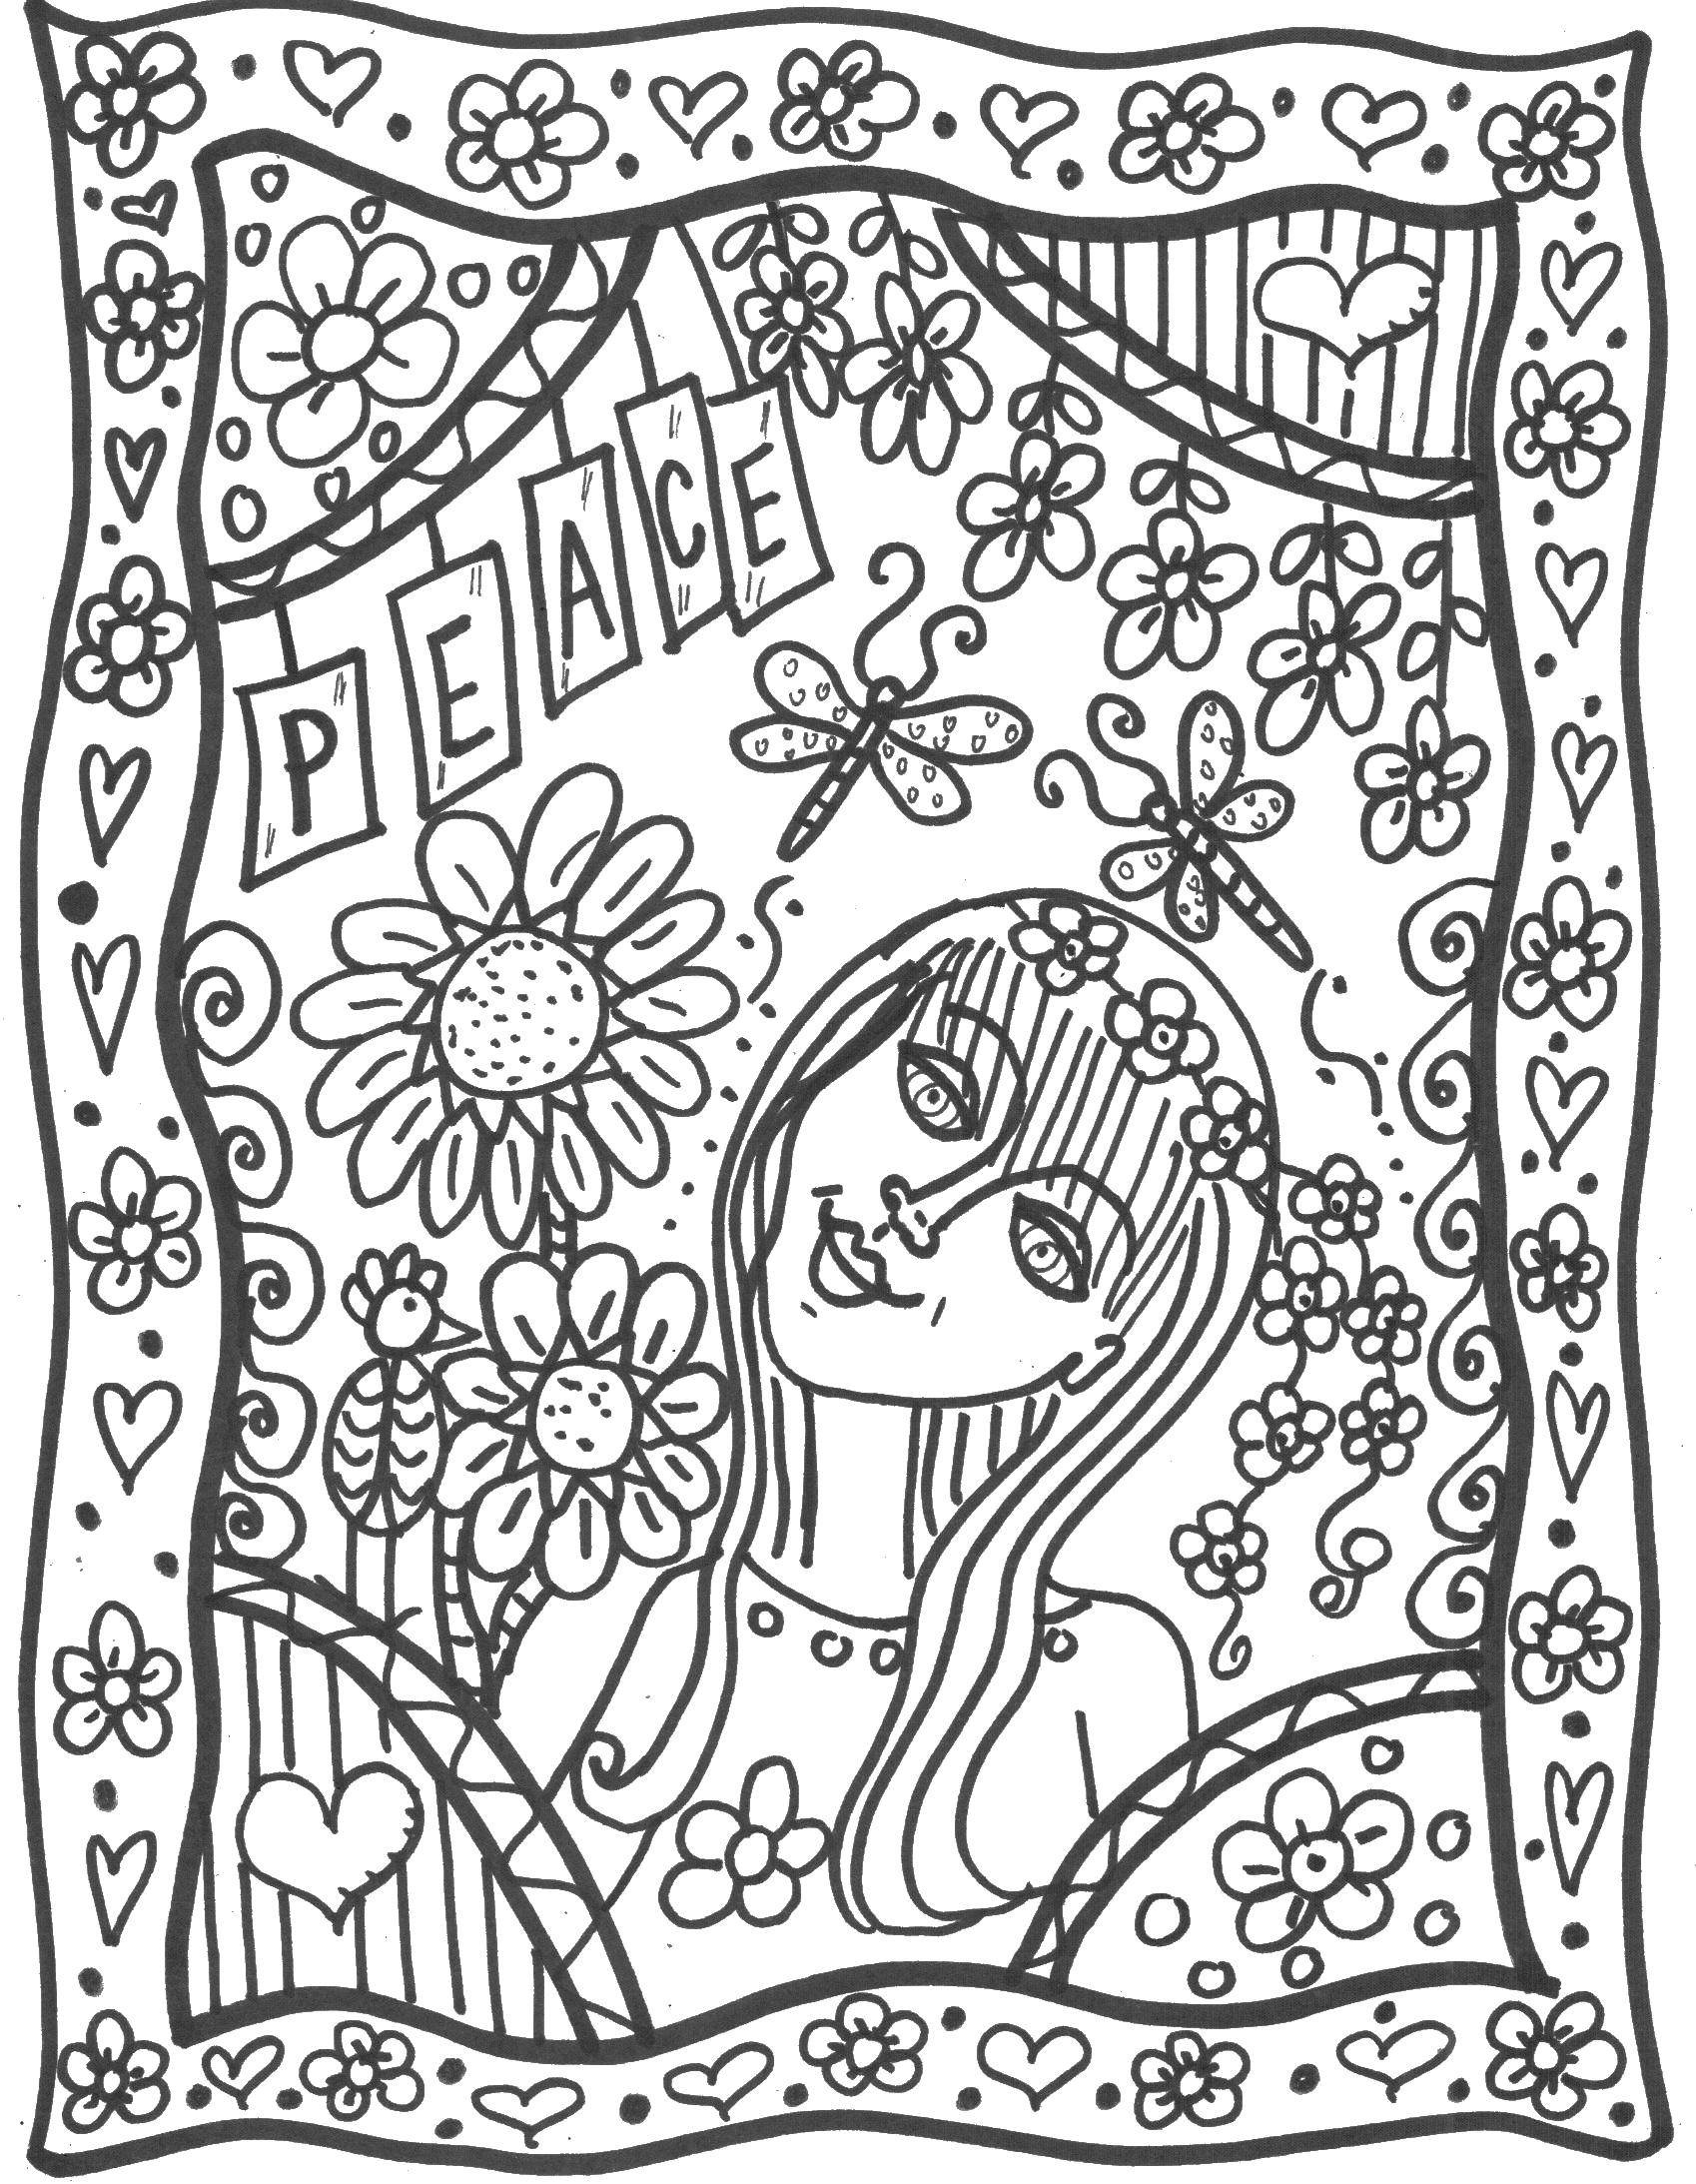 Coloring Girl with flowers. Category For girls. Tags:  girl, flowers.